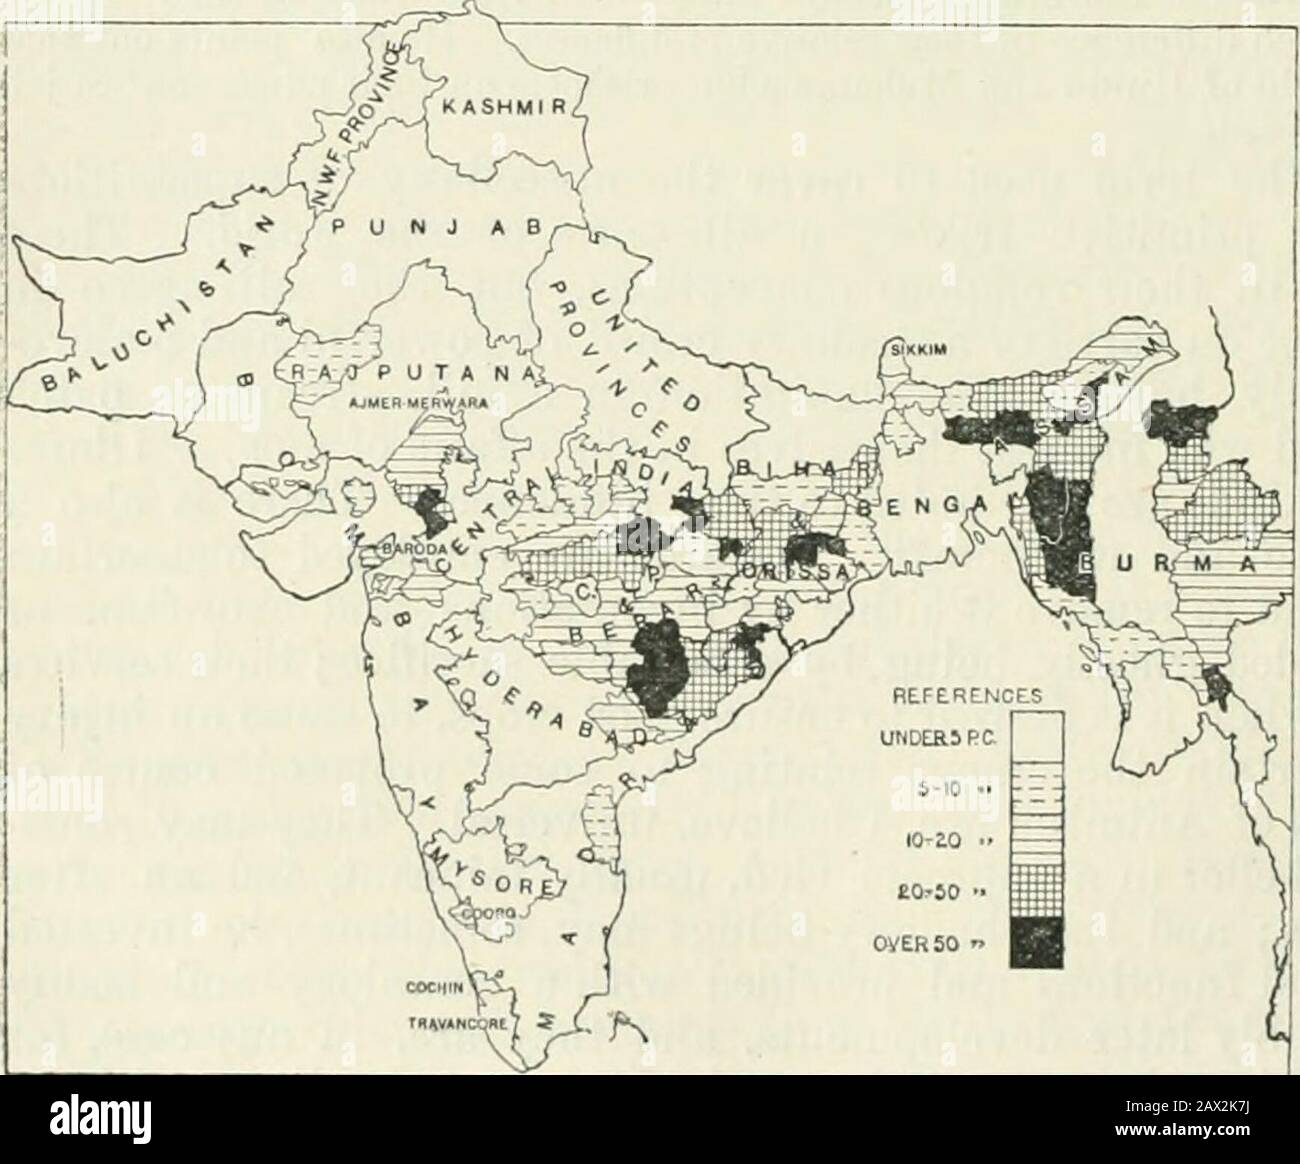 Census of India, 1911 .. . ns of Darjeeling and the Duars. Of the Native States, Animists are most numerous in those Map showing the distribution of Animists. fittached tO Assam and the CentralProvinces and Berar,where they formmore than one-thirdof the aggregate po-pulation, and in thoseof Bihar and Orissawhere they are morethan one-eightli. Inorder to show moreclearly their localdistribution, I havedistinguished in themarginal map theparts of each pro-vince where theyare chiefly found.Tlie Animists ofBihar and Orissa arealmost wholly con-fined to the ChotaNagpur plateau,those of the Central Stock Photo